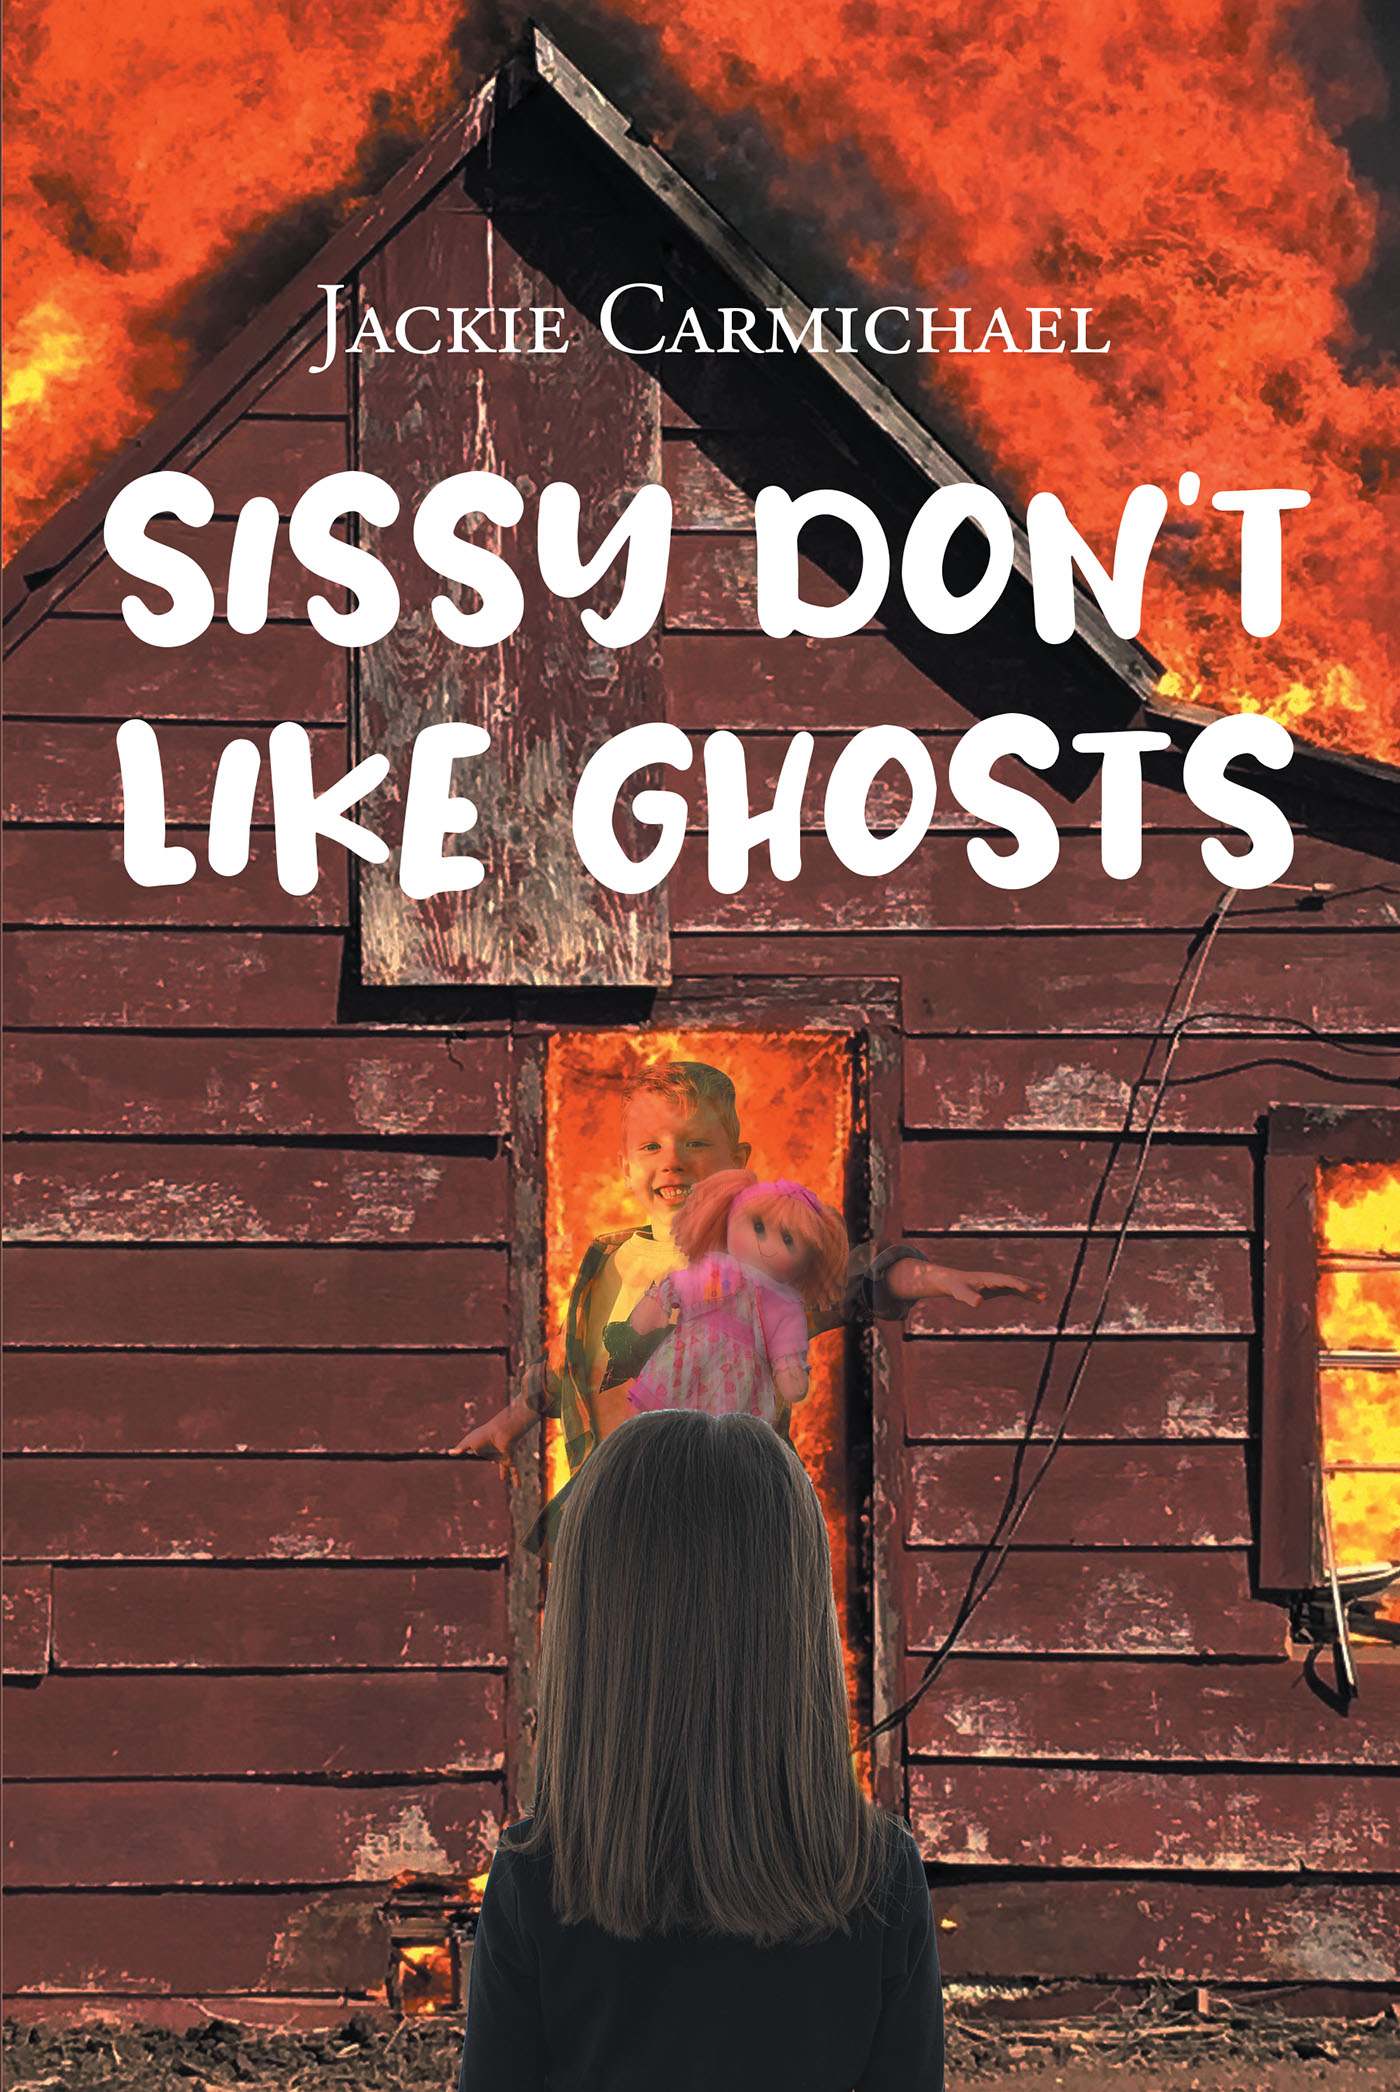 Author Jackie Carmichael’s New Book, "Sissy Don't Like Ghosts," is a Fascinating Story of Four Children Who Band Together to Investigate a Supernatural Mystery